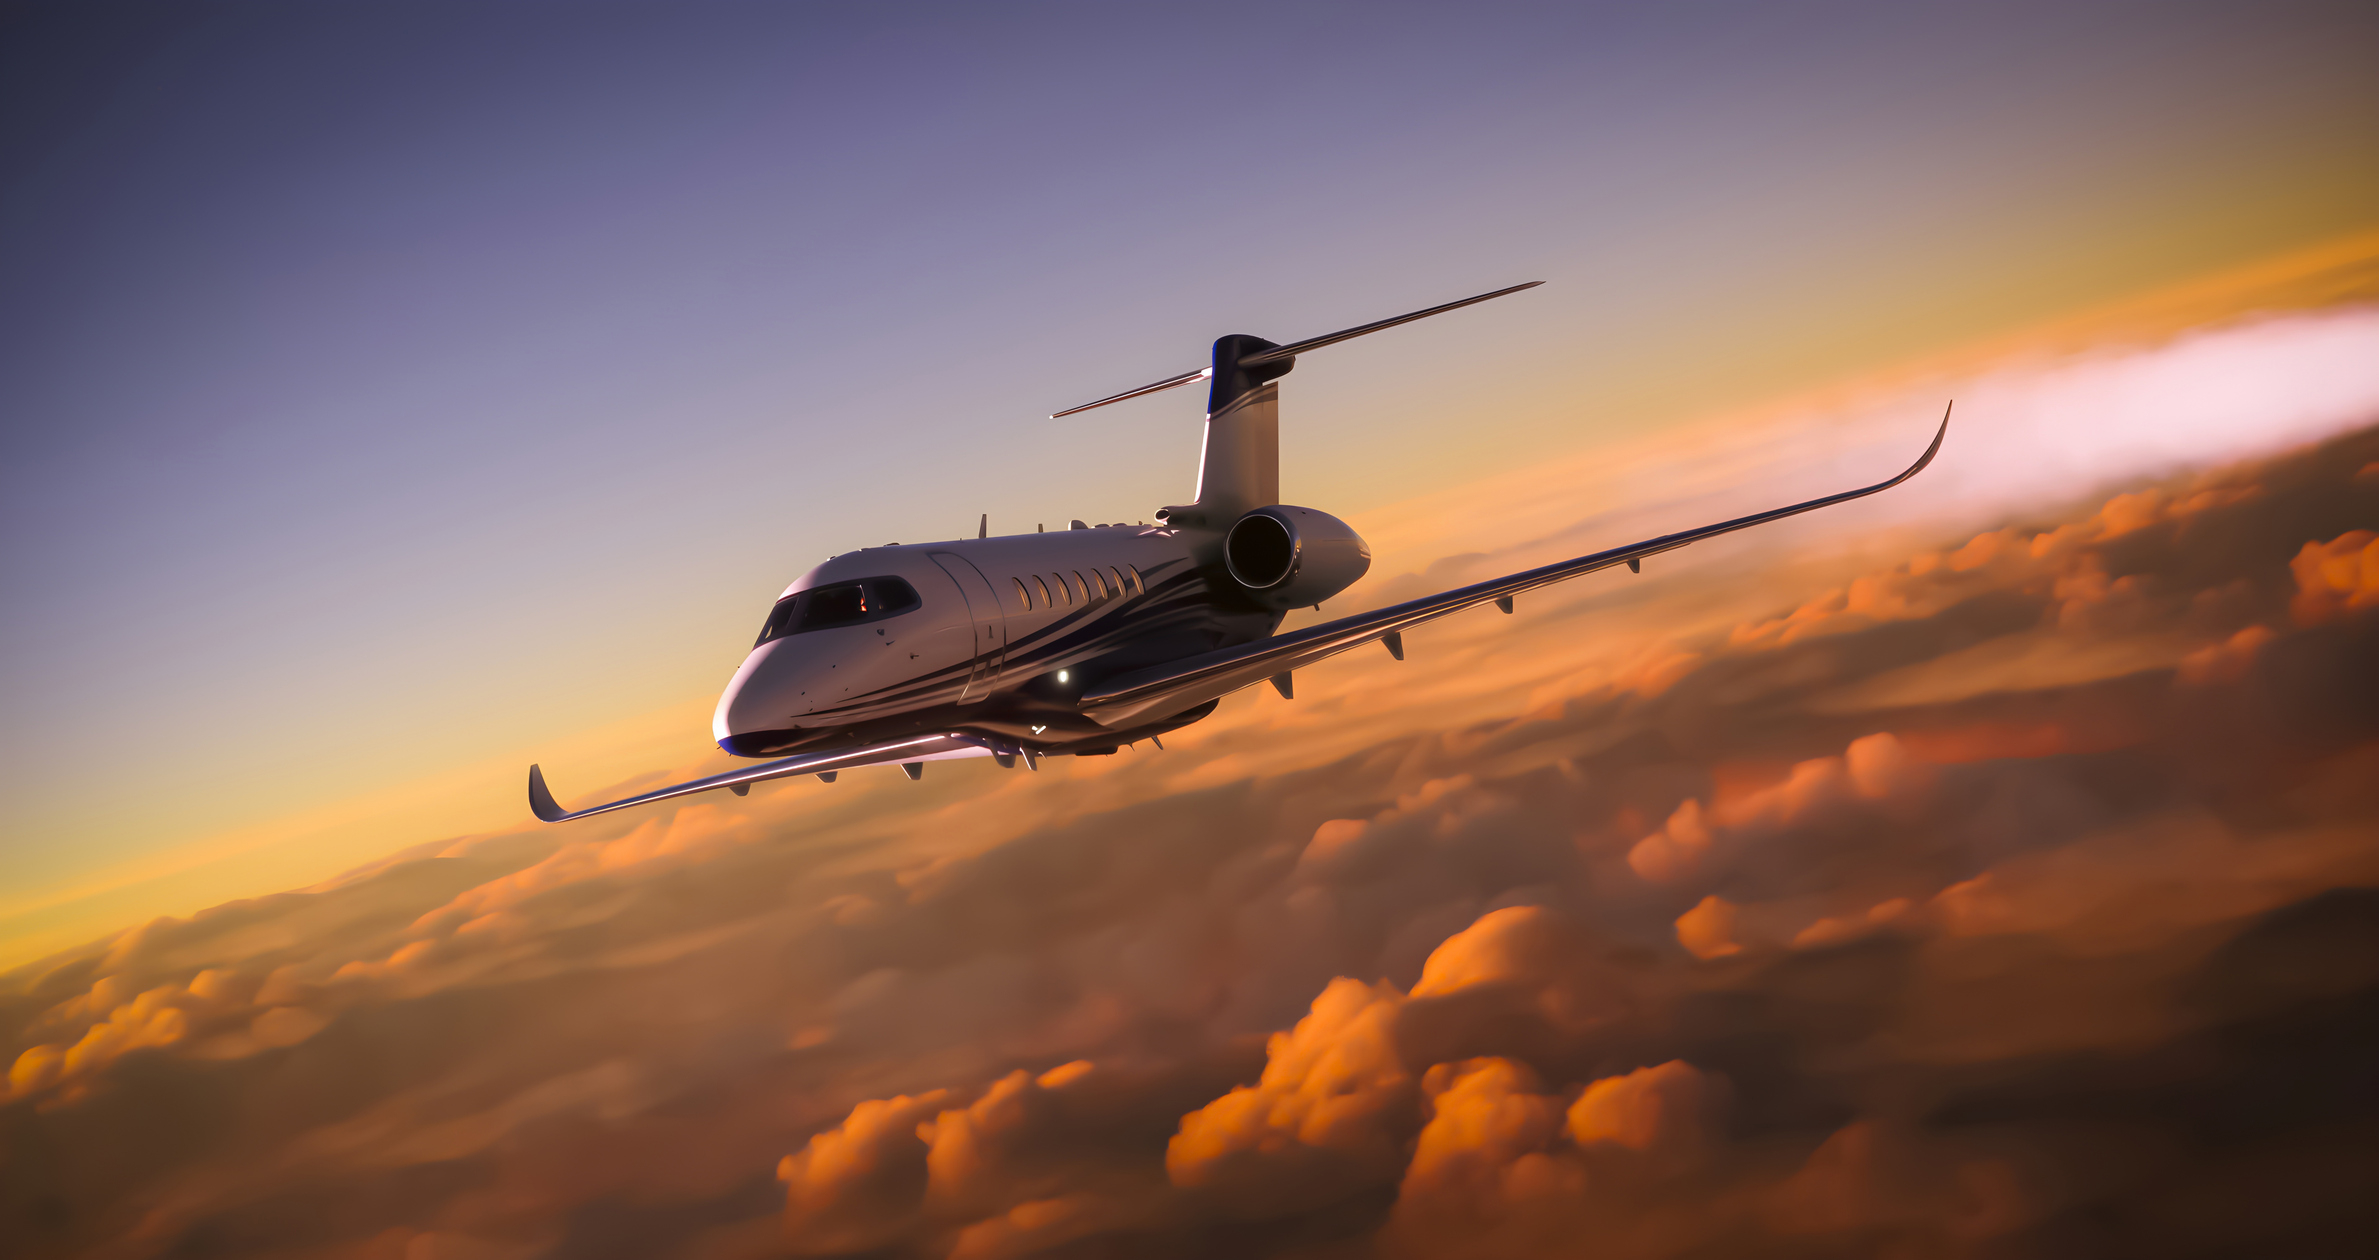 Private jet flying above clouds at sunset, indicating luxury business travel or private wealth